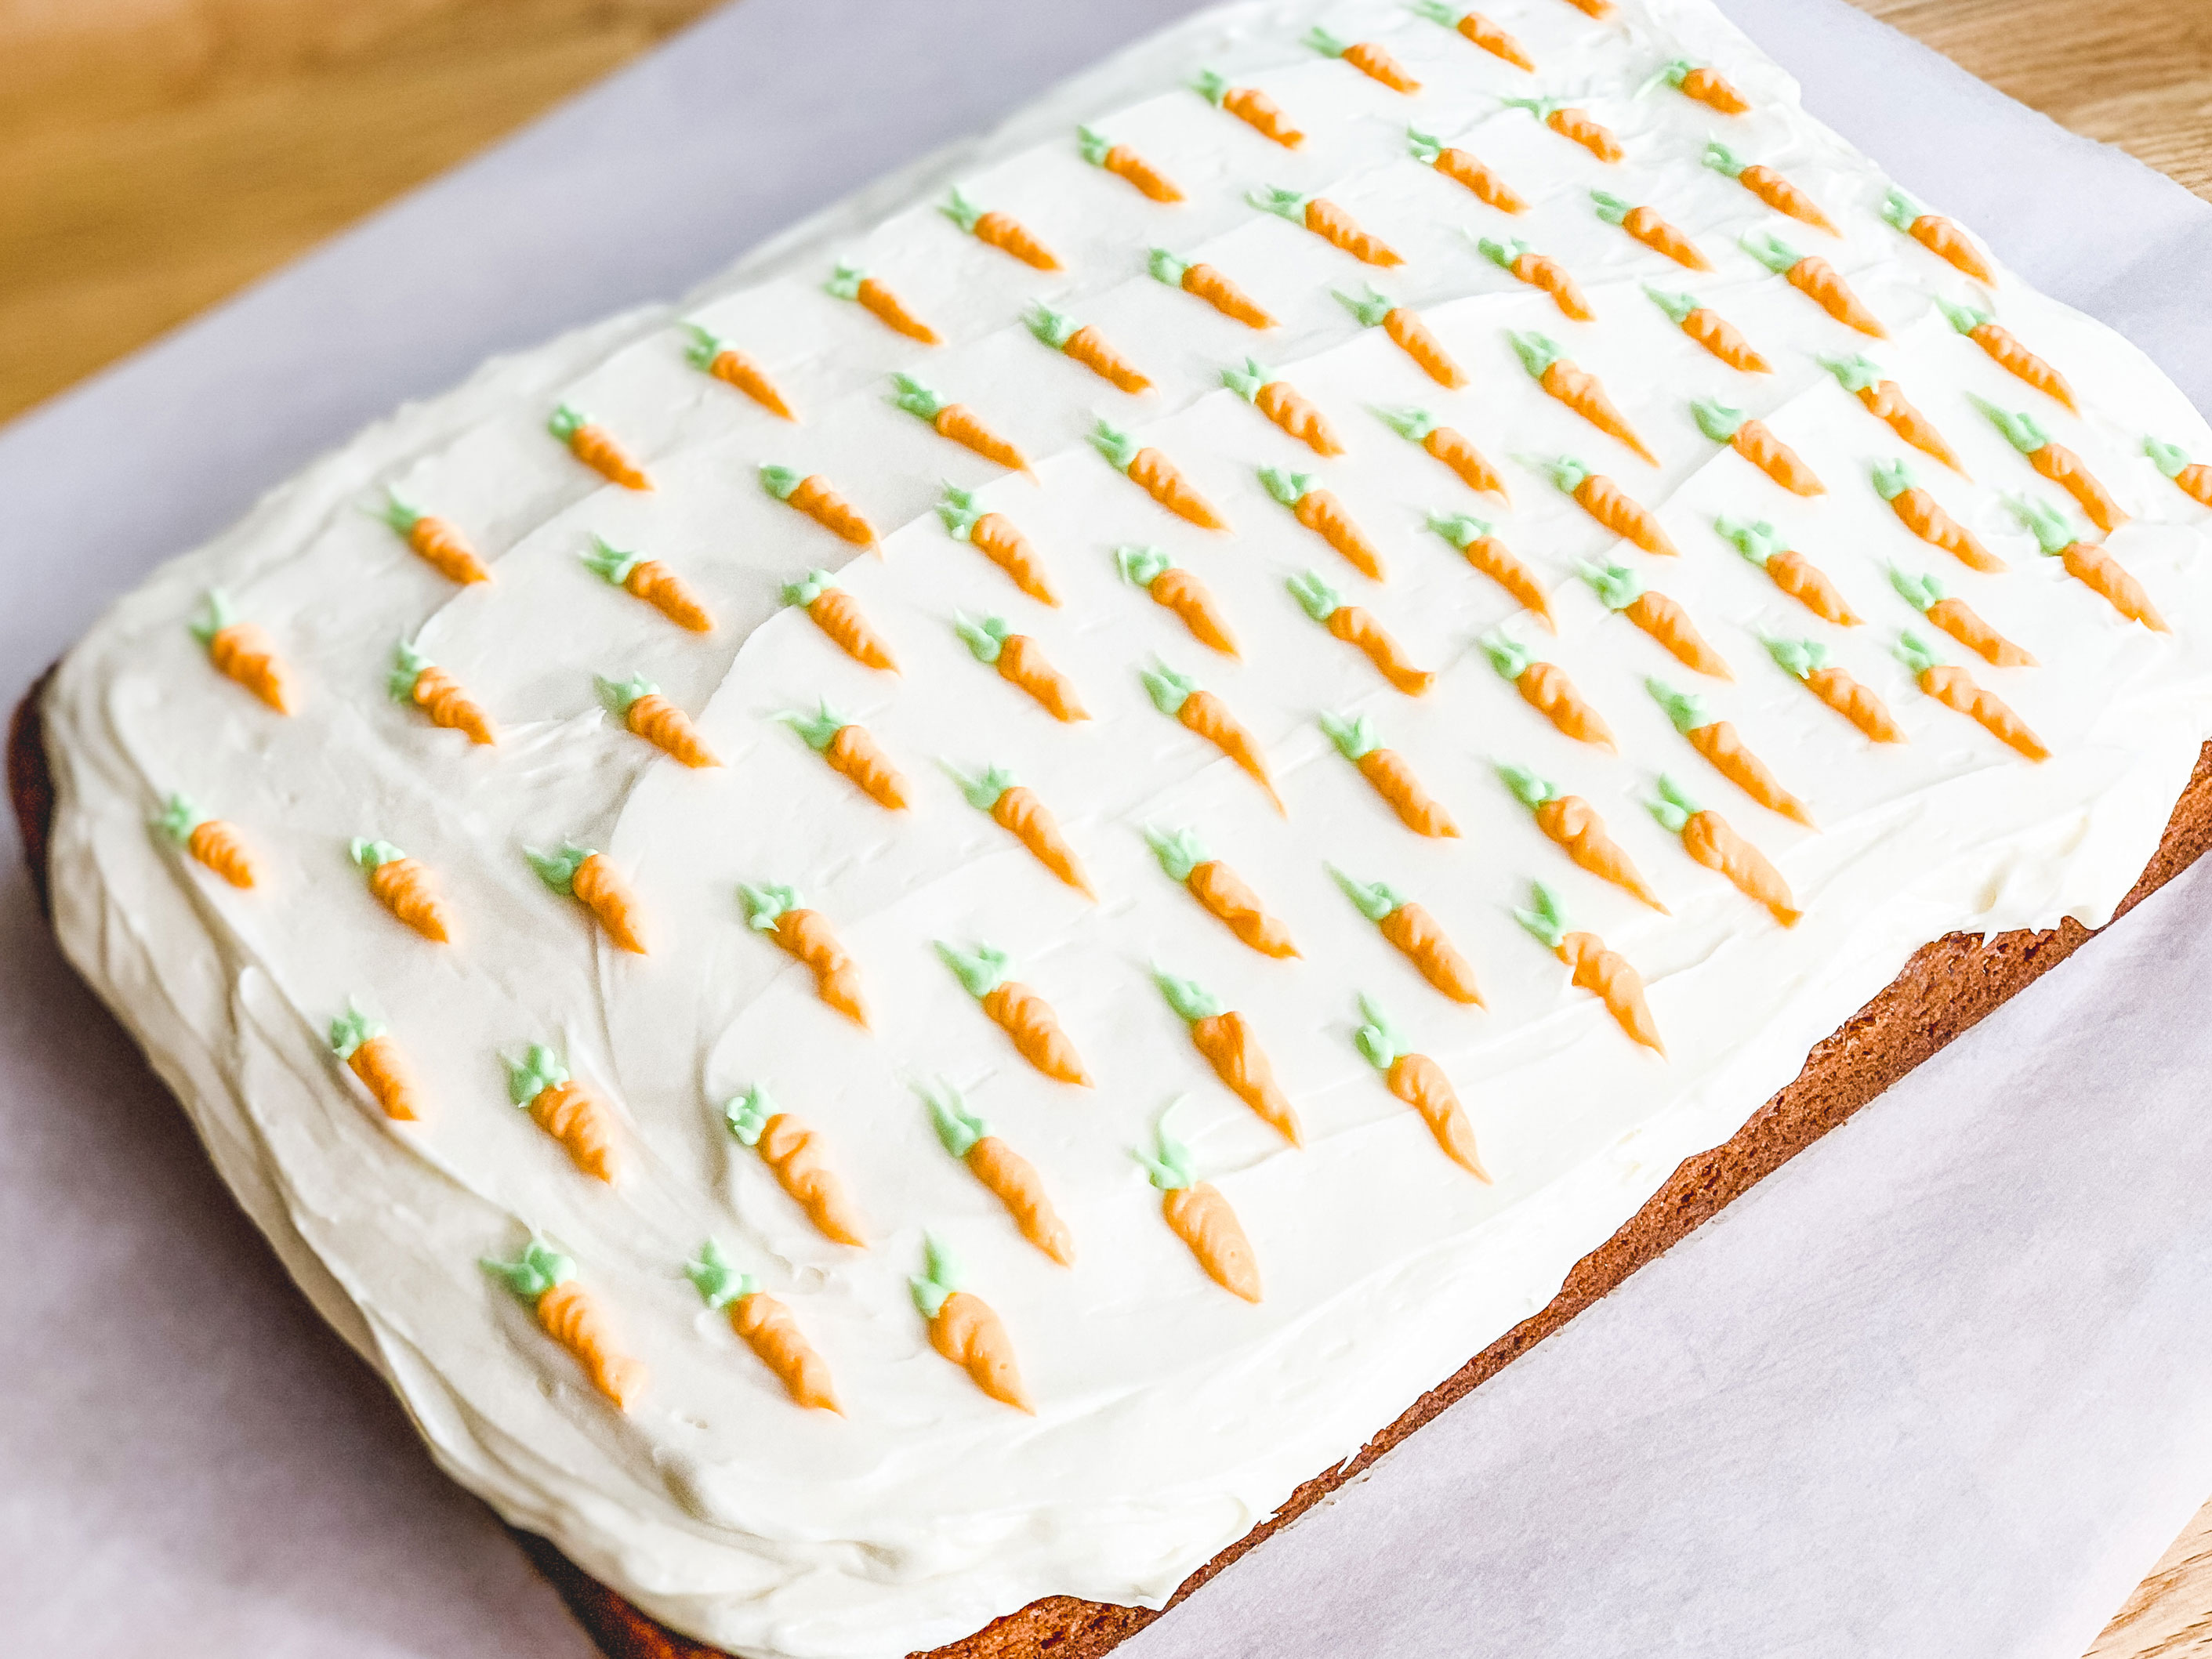 Mikes Pies 2 Layer 10 Cut Carrot Cake, 10 inch -- 2 per case